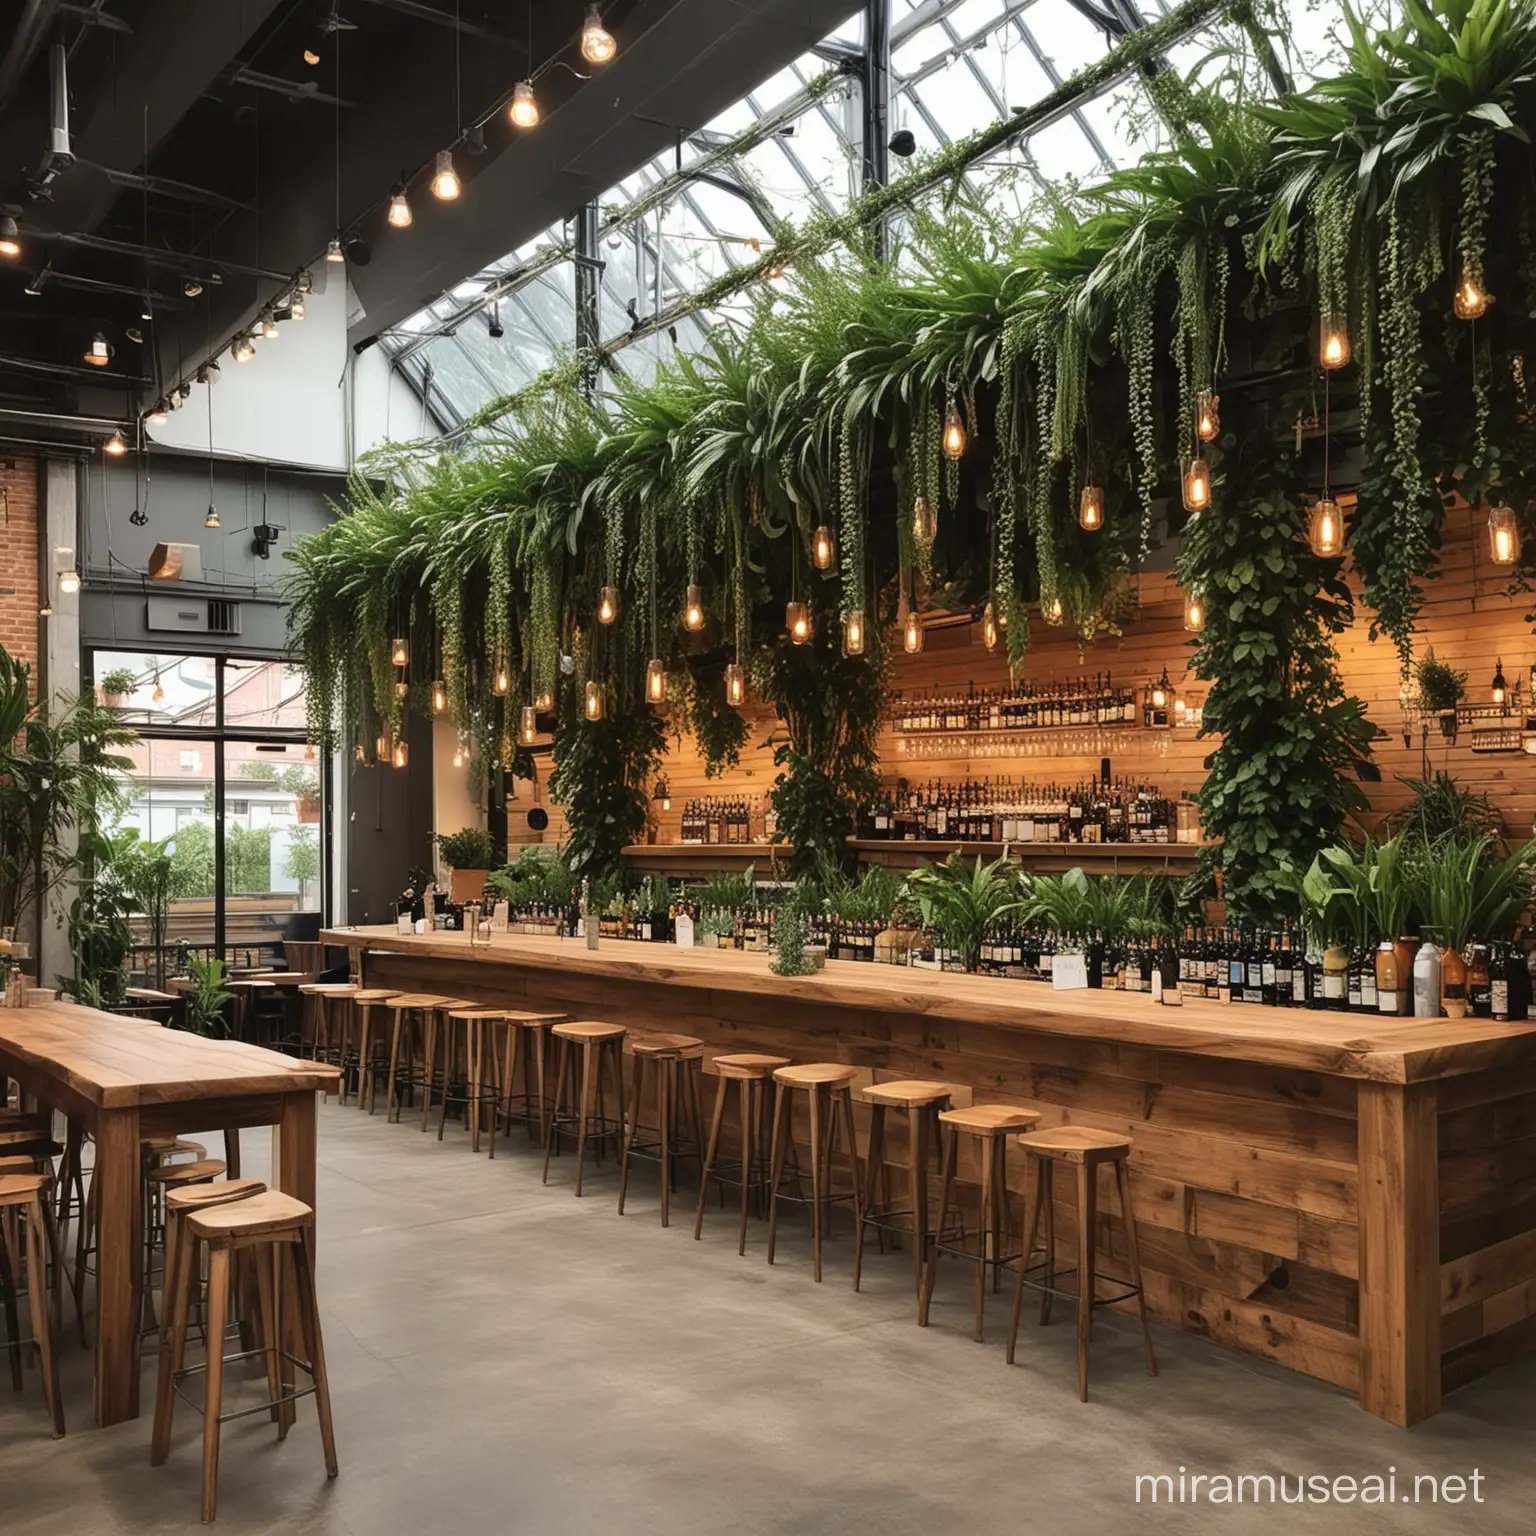 Show me a modern beer hall with live plants and Czech and Norwegian design influences. Maybe with some treehouse accents. 